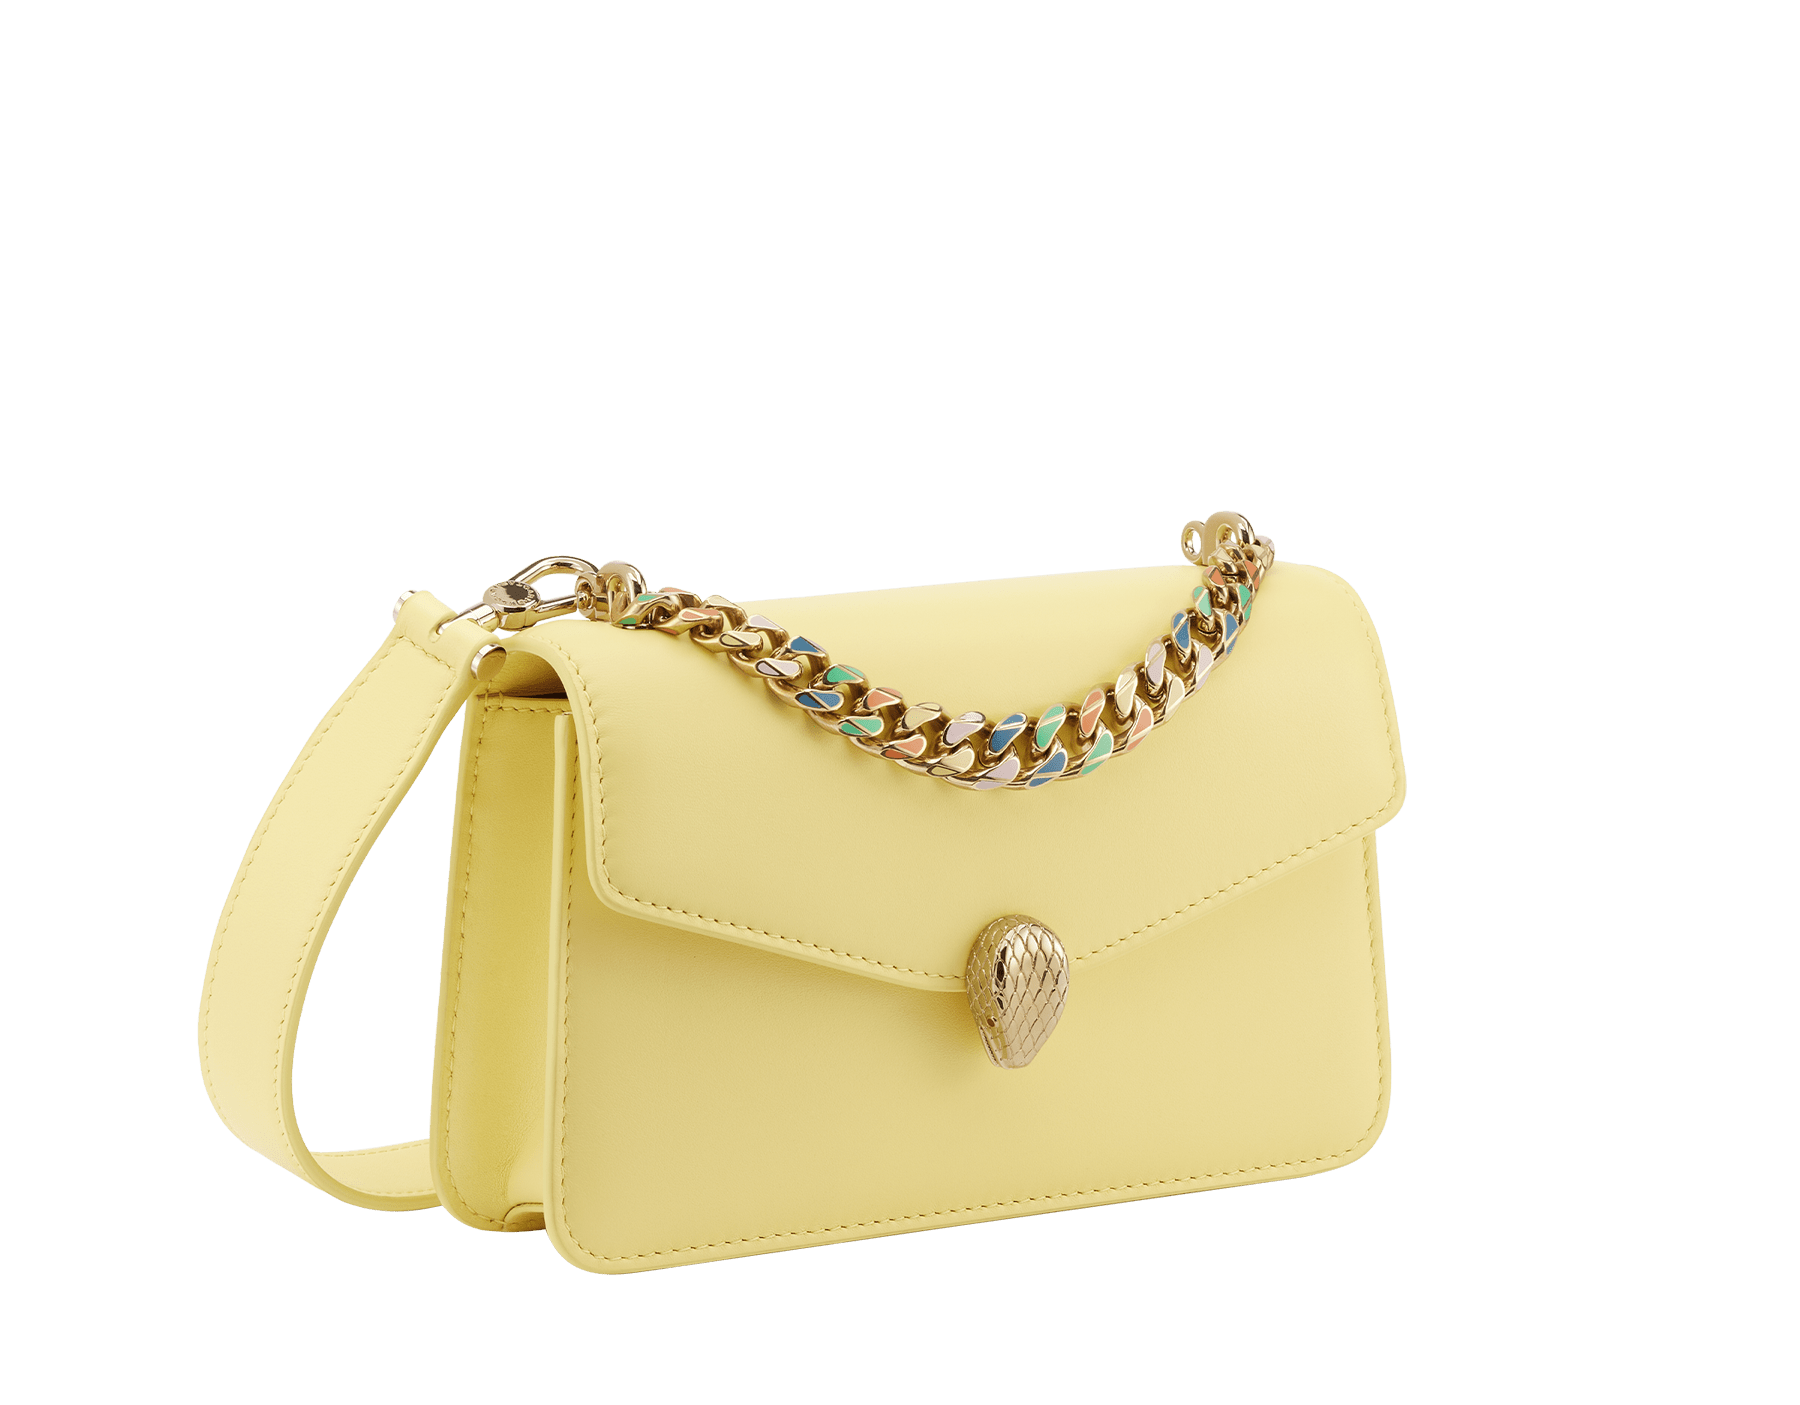 "Serpenti Forever" maxi chain pochette in Blush Quartz pink calf leather and Deep Garnet bordeaux nappa leather. New Serpenti head closure in gold-plated brass, finished with red enamel eyes. SEA-XLCHAINPOUCH image 1